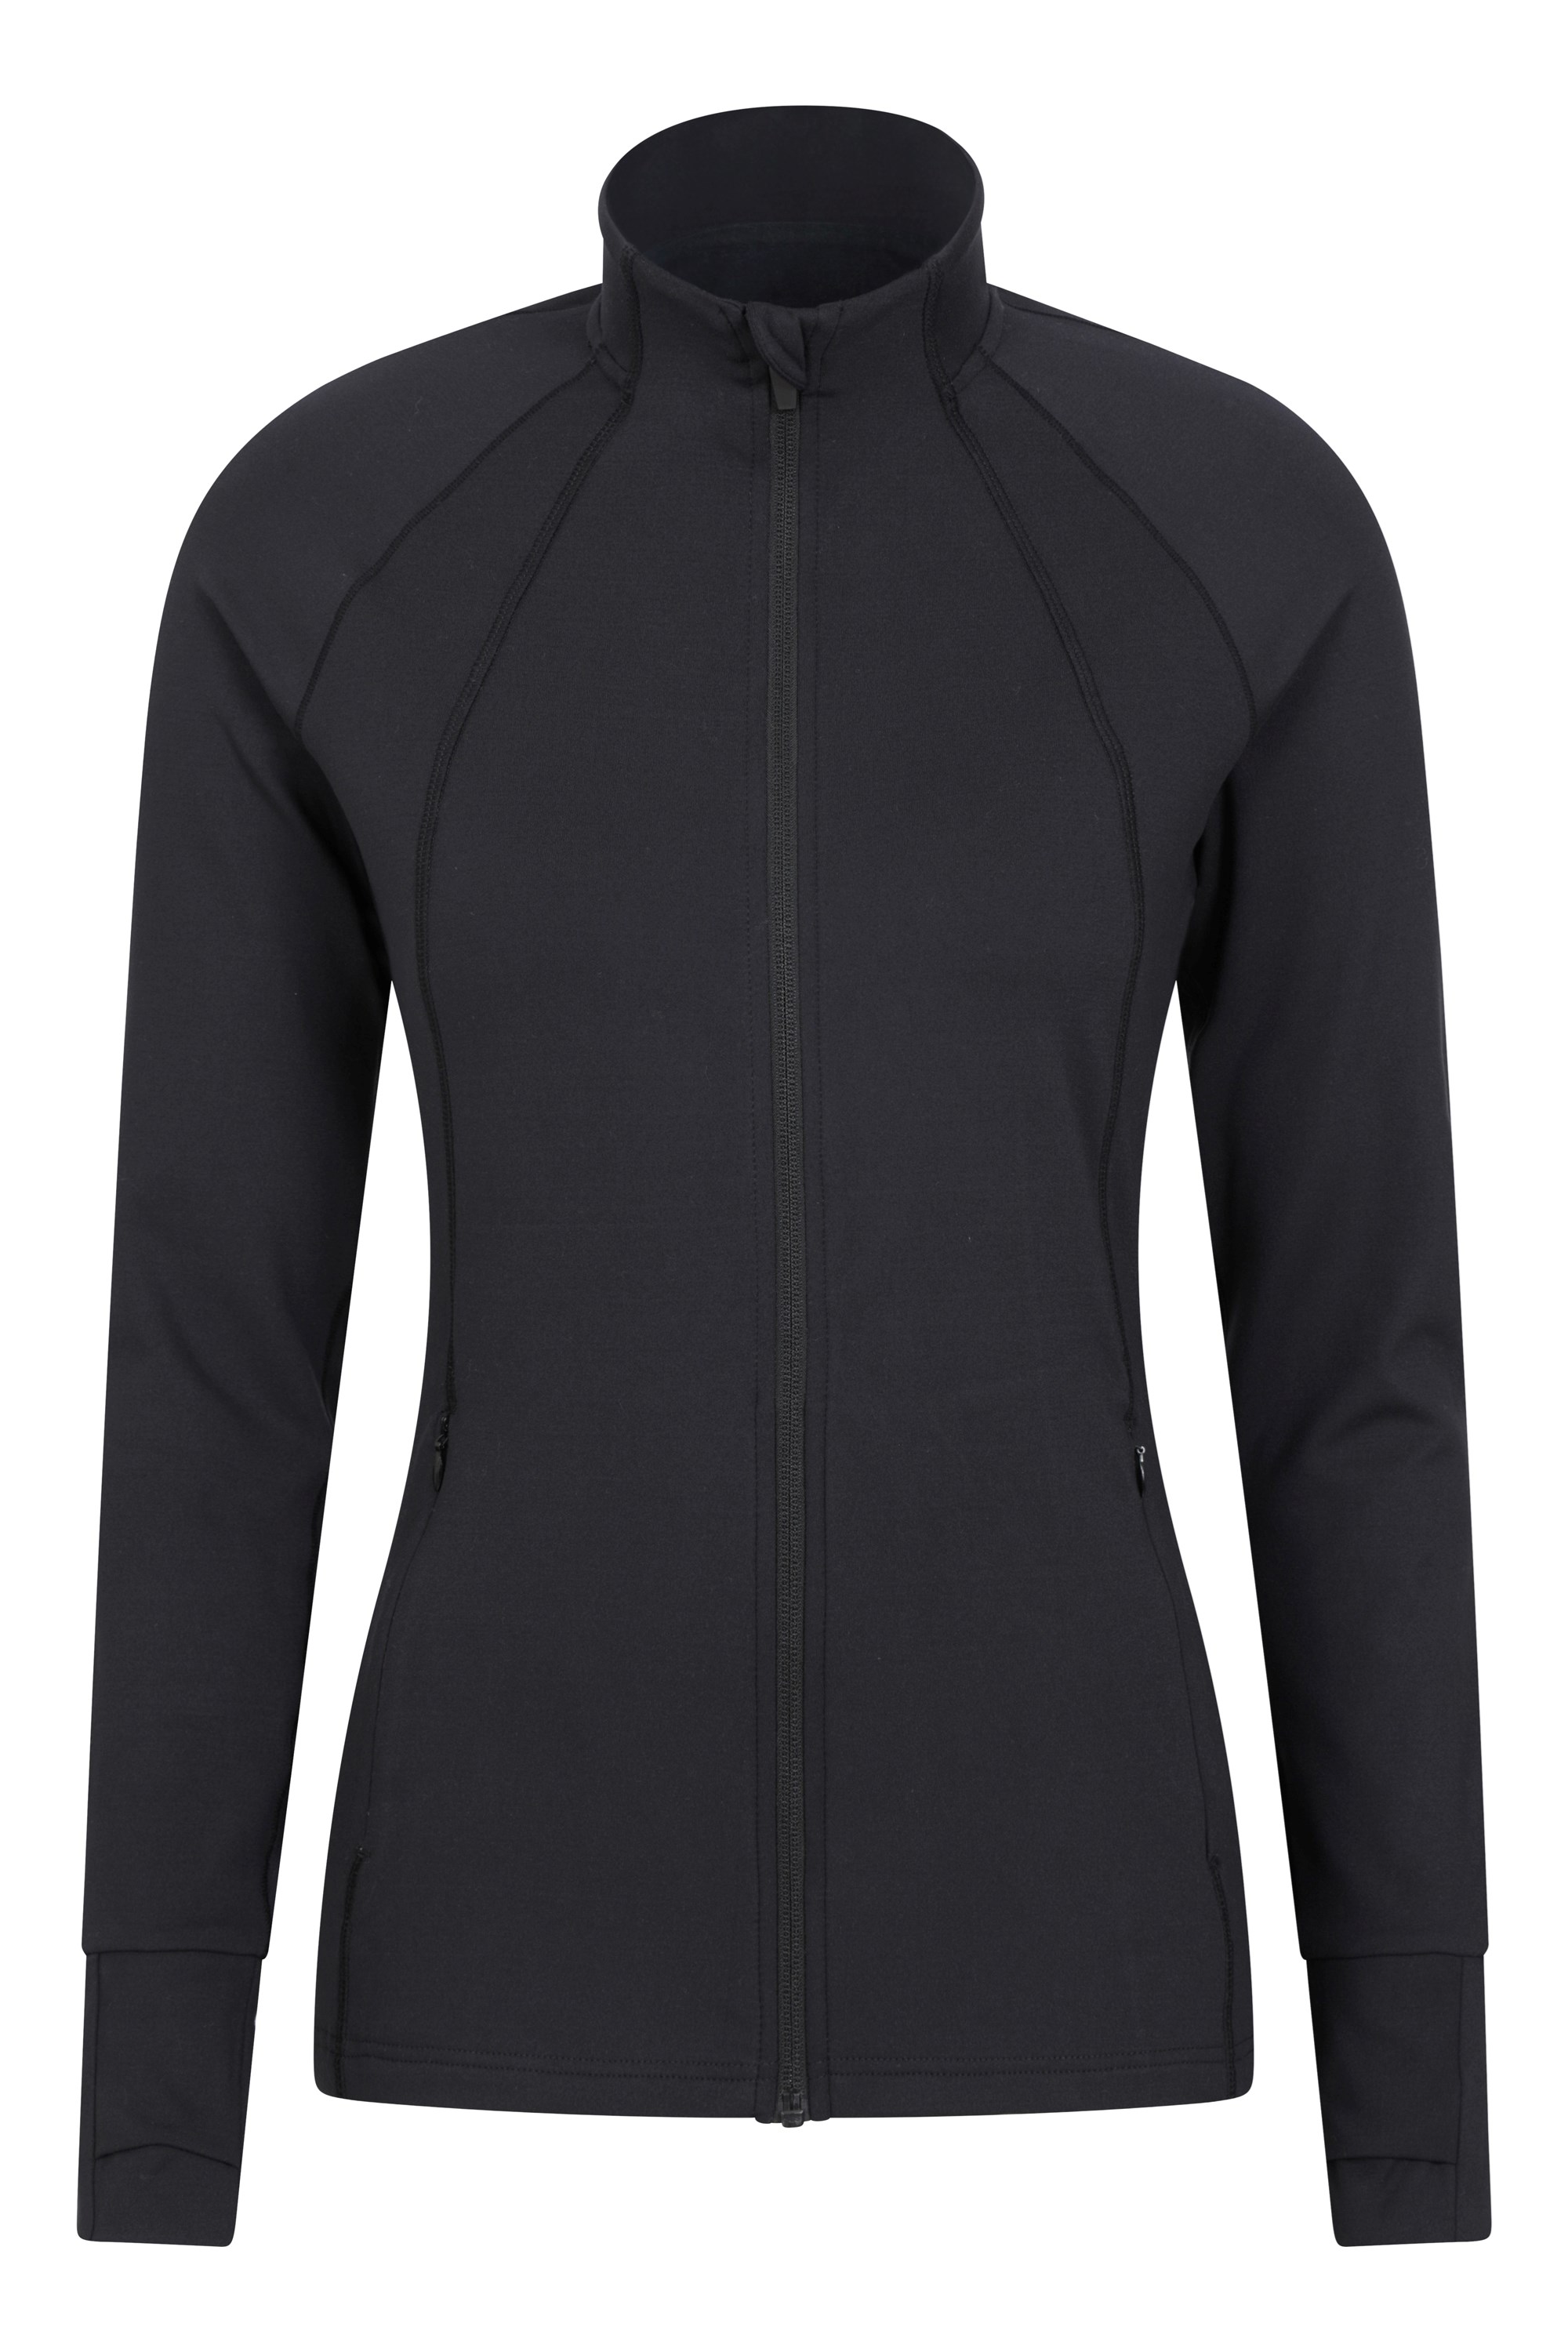 Womens Recycled Shaped Active Midlayer - Black